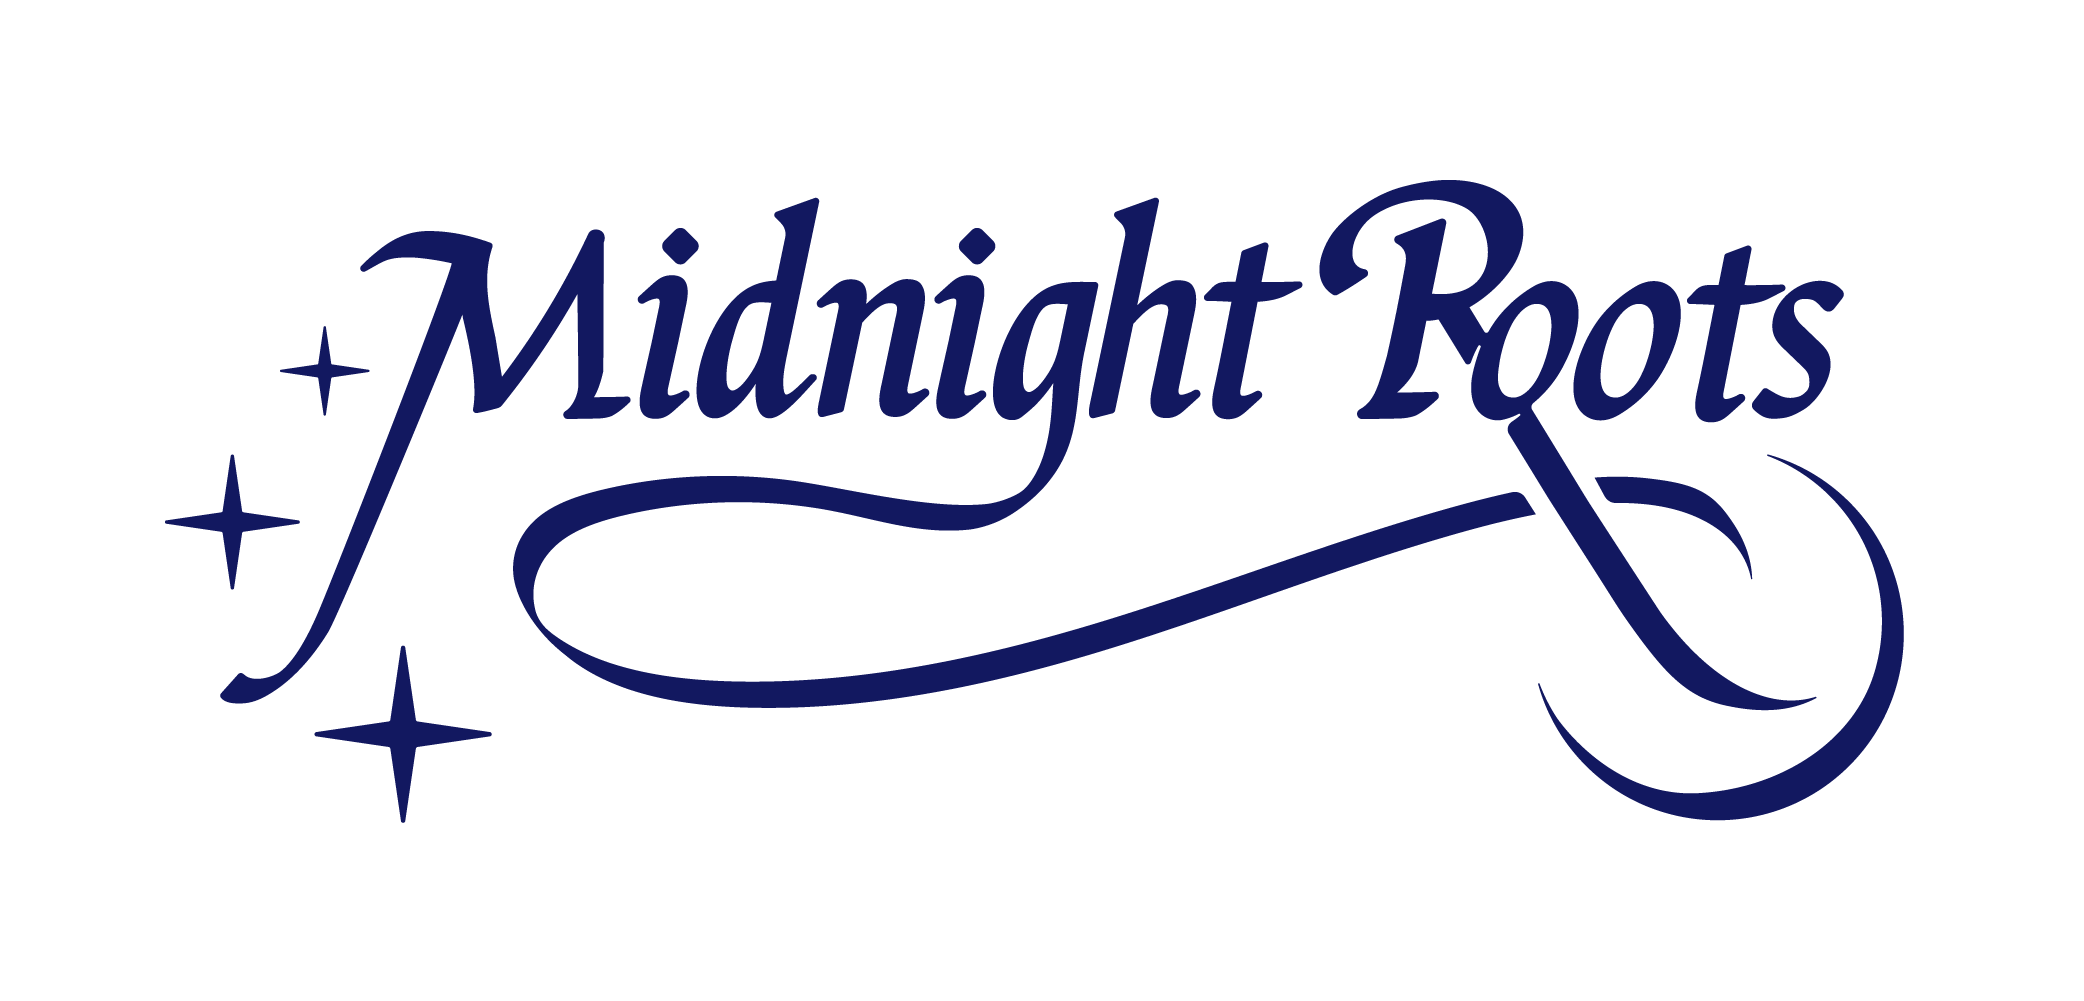 Midnight Roots has positioned itself as industry standard creators and connoisseurs of luxury cannabis products